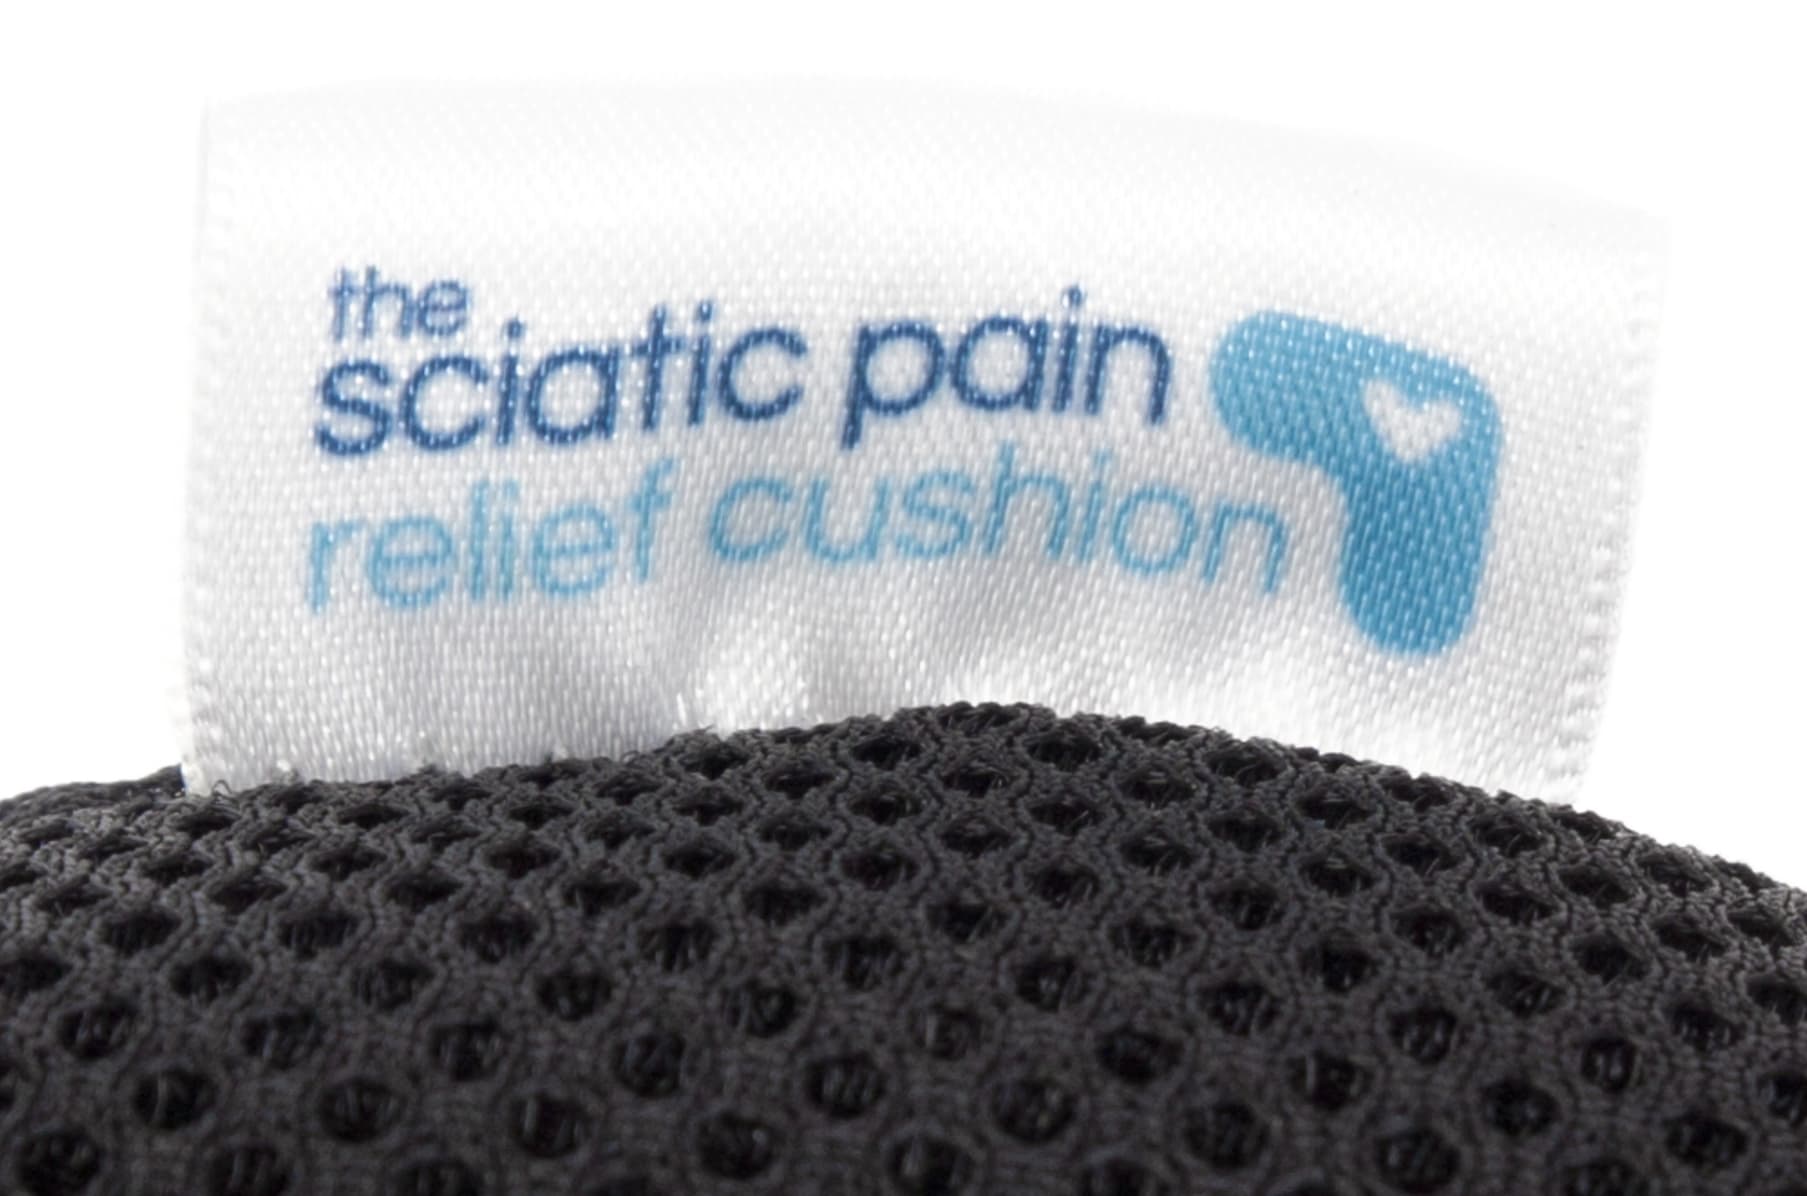 The Sciatic Pain Relief Cushion